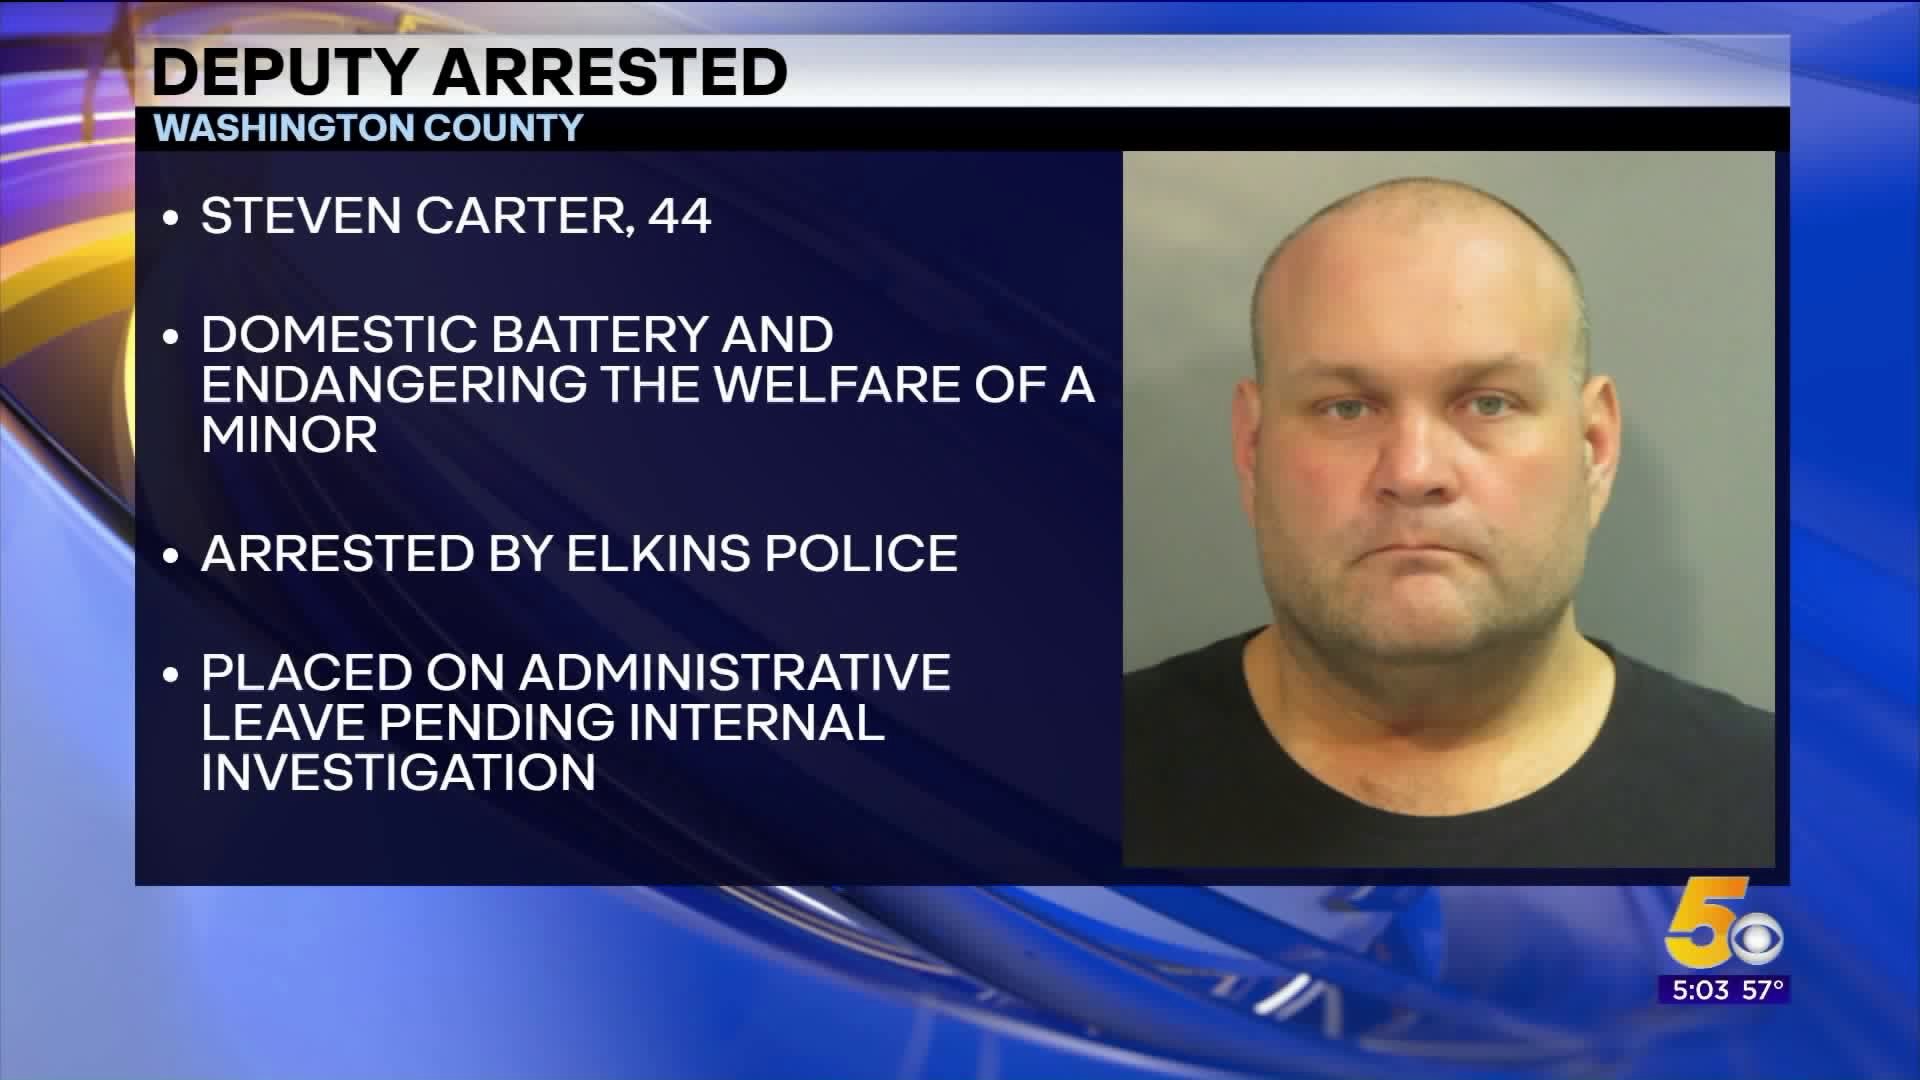 Washington County Deputy Arrested For Domestic Battery, Endangering The Welfare Of A Minor